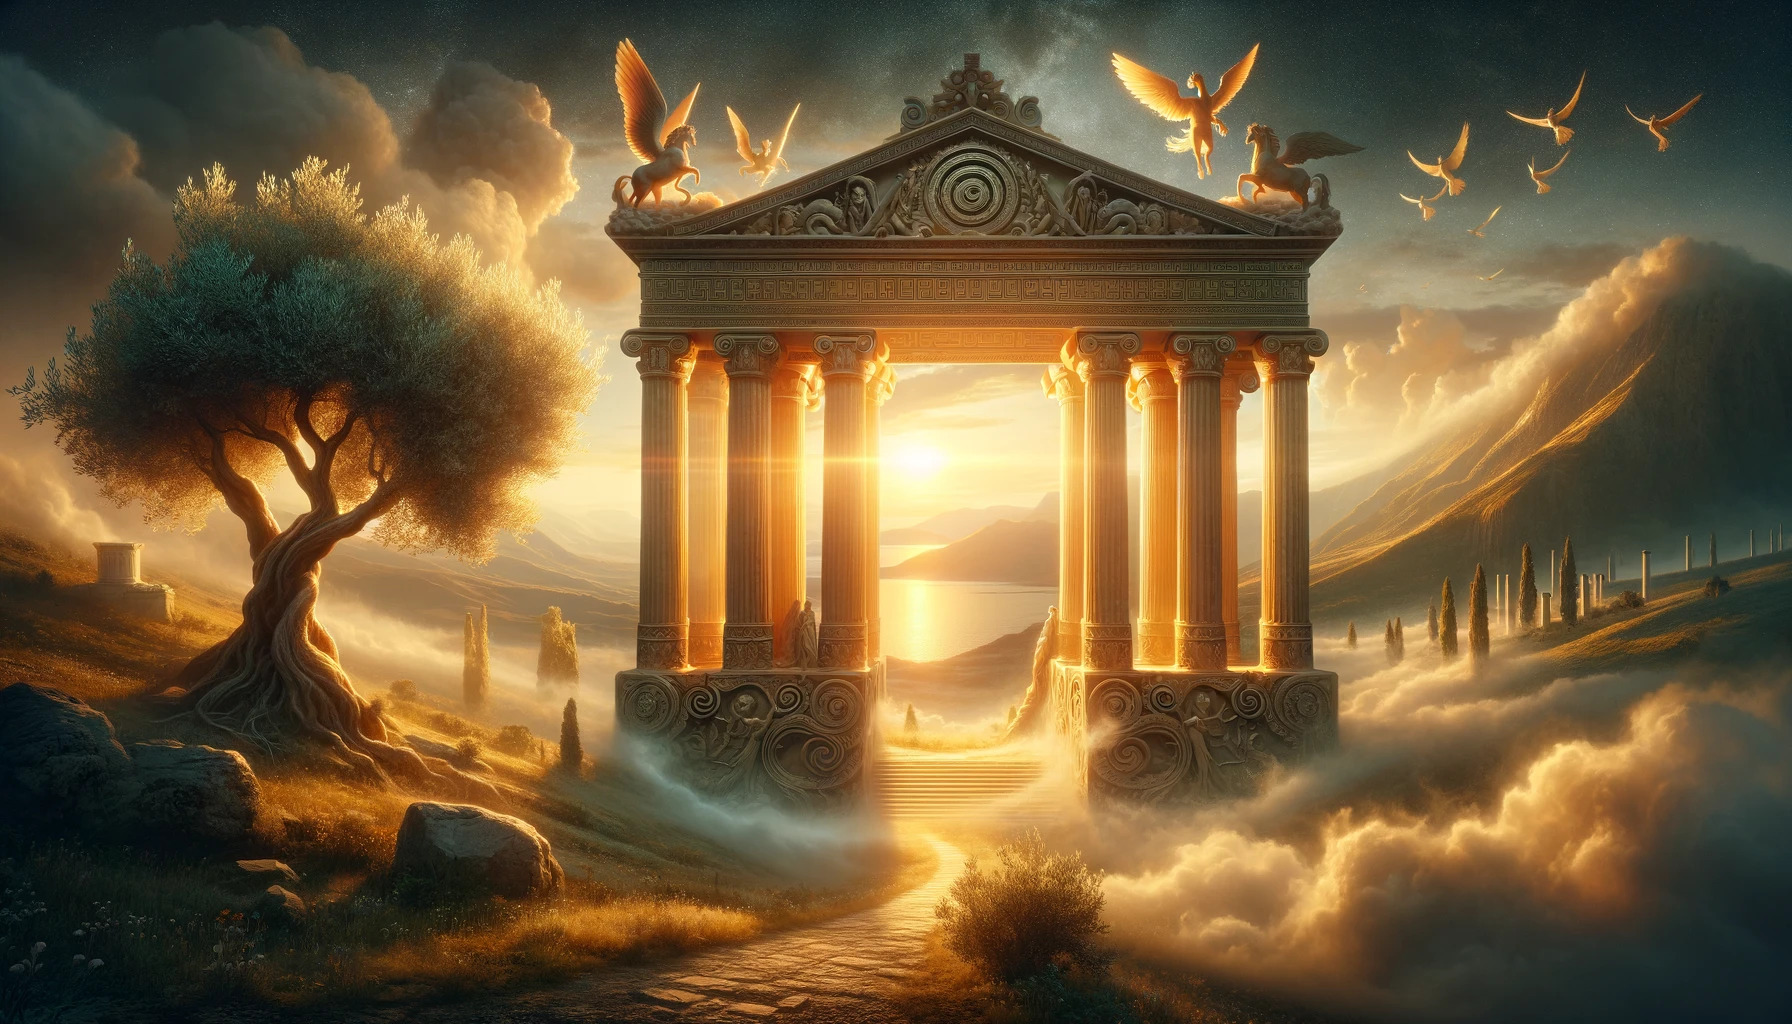 a cinematic image that captures the essence of an ancient Greek name generator without including any letters, numbers, or names. Feel free to explore the mystical scene that evokes the timeless beauty and mystery of Greece.